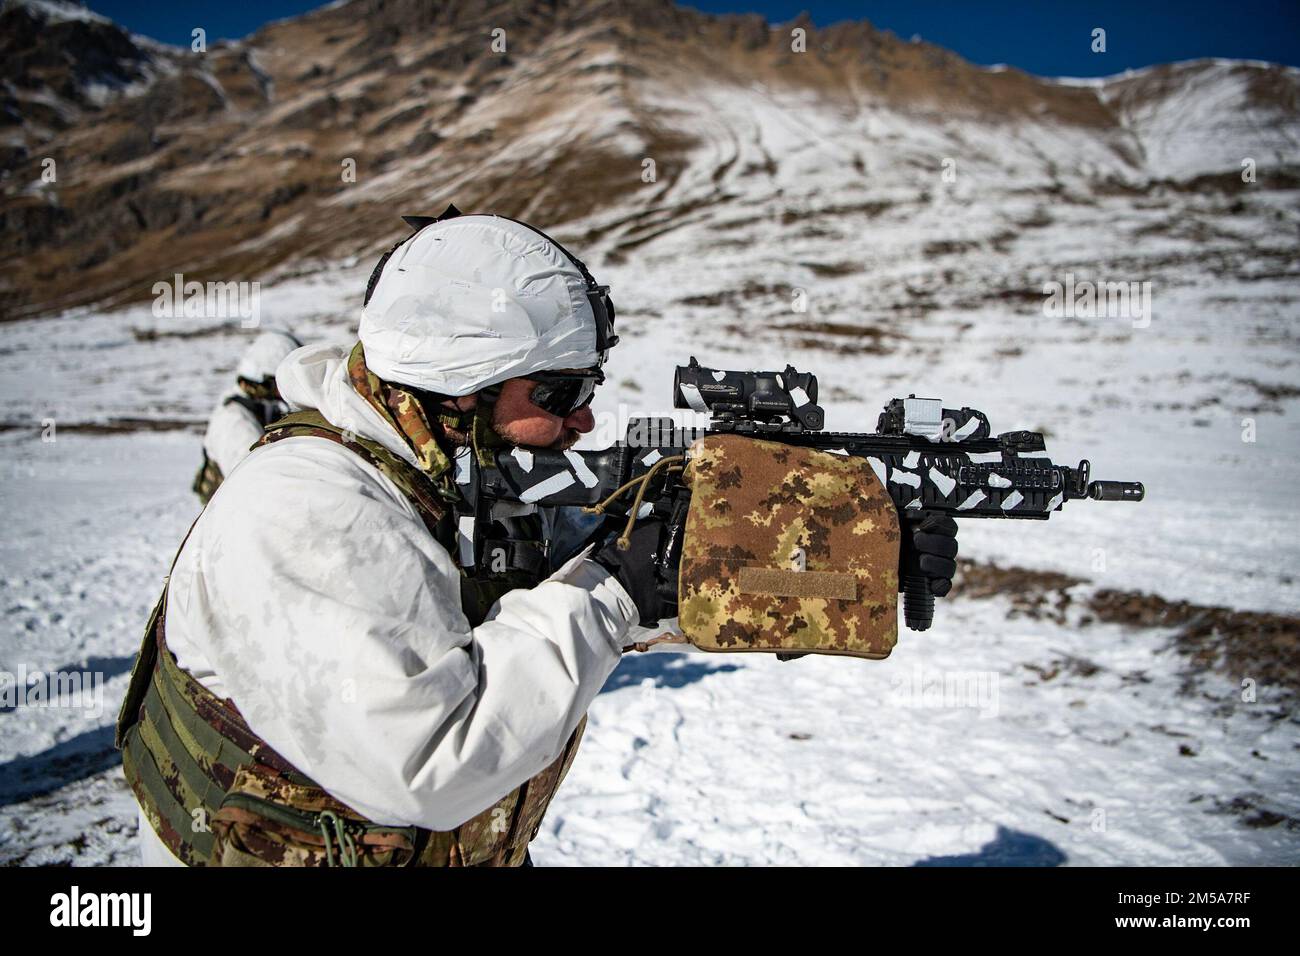 An Italian soldier from the 3rd Alpini Regiment provides covering fire for his team during an integrated marksmanship range alongside U.S. Army paratroopers assigned to the 173rd Airborne Brigade. This training is part of Exercise Steel Blizzard at Pian dell’Alpe in Usseaux, Italy on Feb. 15, 2022.     Exercise Steel Blizzard is an Italian Army-hosted multinational mountain and arctic warfare training exercise. Three reconnaissance platoons from the 173rd Airborne Brigade take part in a three-phase training regimen with the 3rd Alpini Regiment to expand force capabilities by learning how to sh Stock Photo